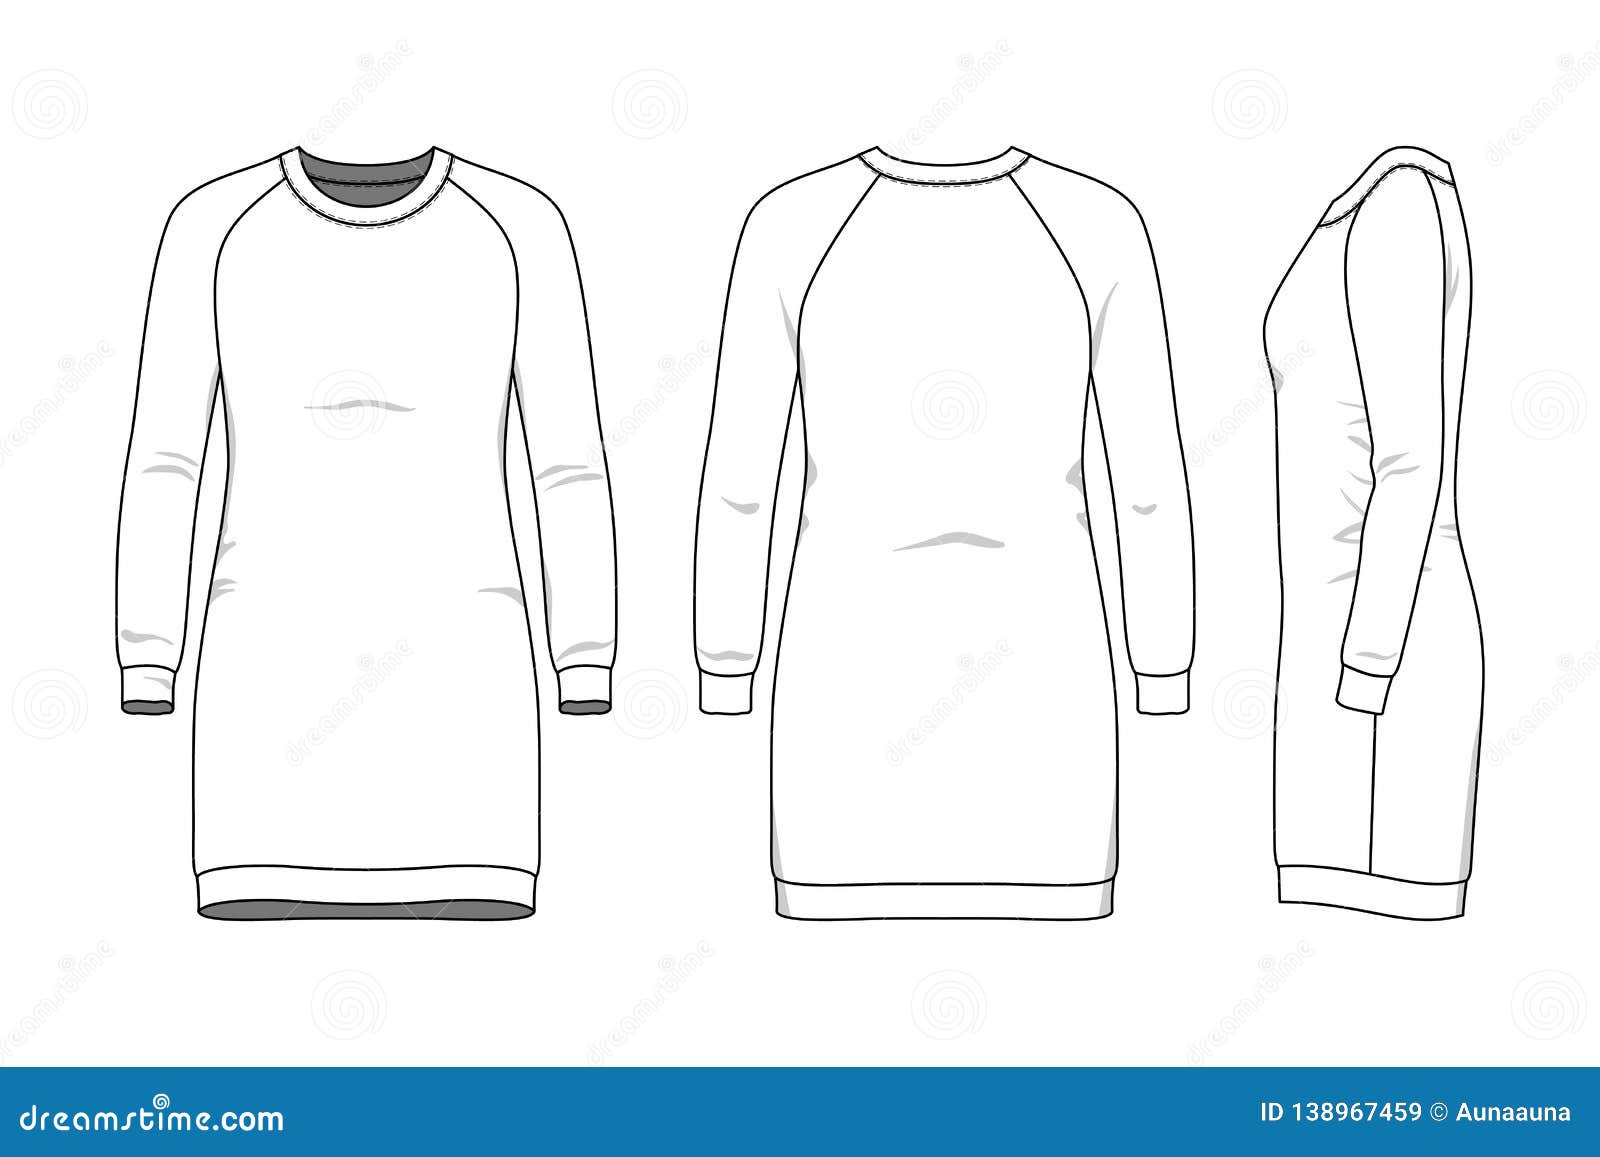 Illustration Of The Human Body. Mare Female Sketch Royalty Free SVG,  Cliparts, Vectors, and Stock Illustration. Image 149987492.